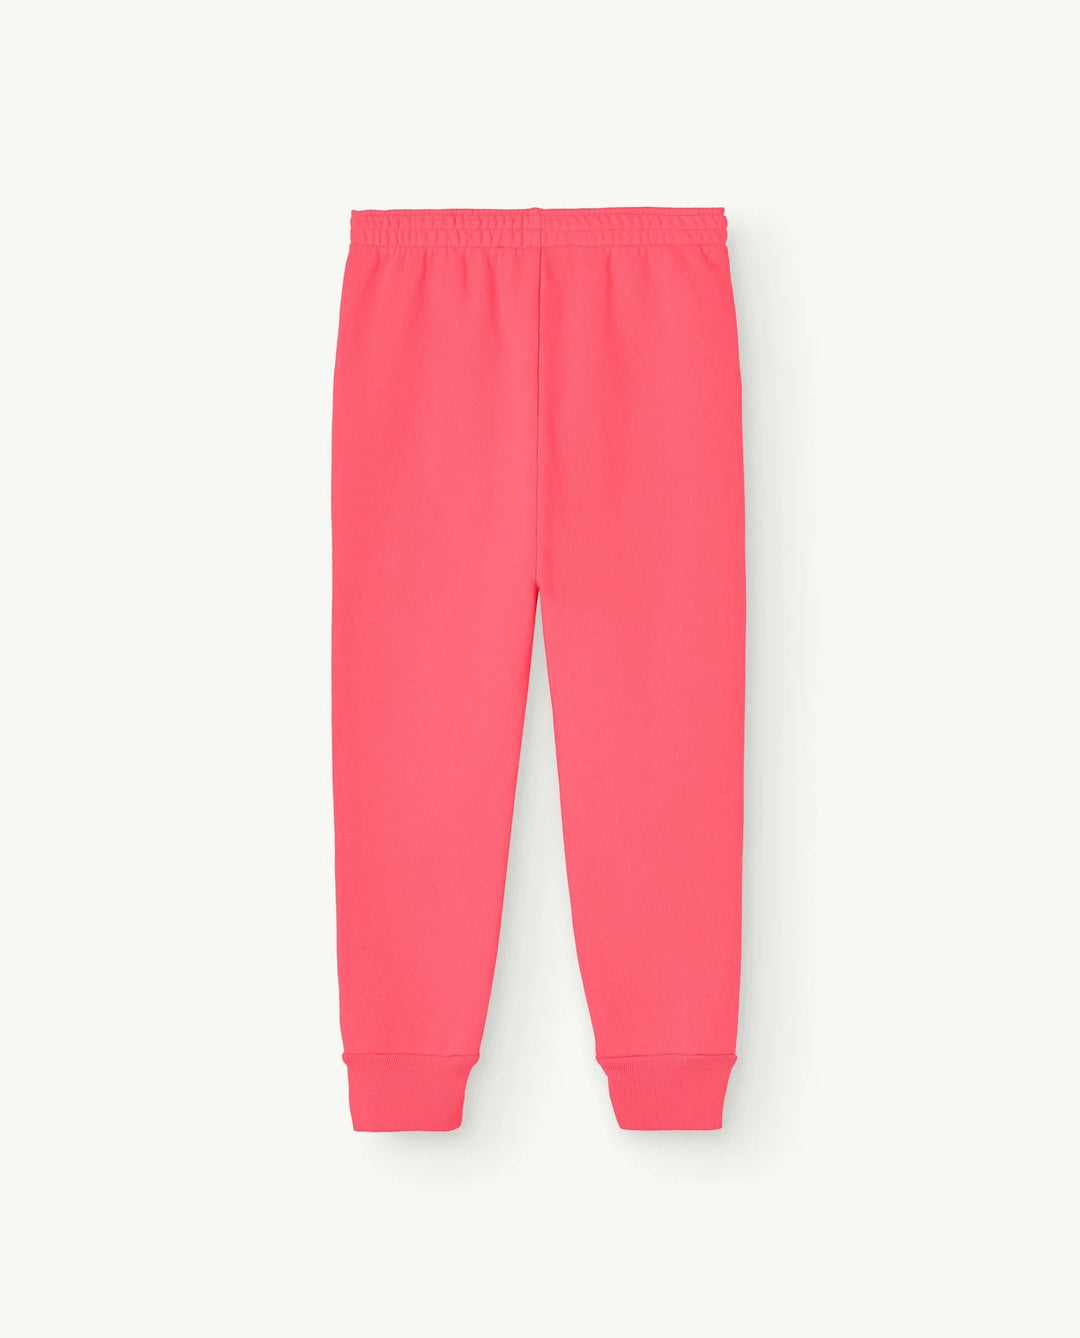 THE ANIMALS OBSERVATORY Kids Pink Draco Sweatpants